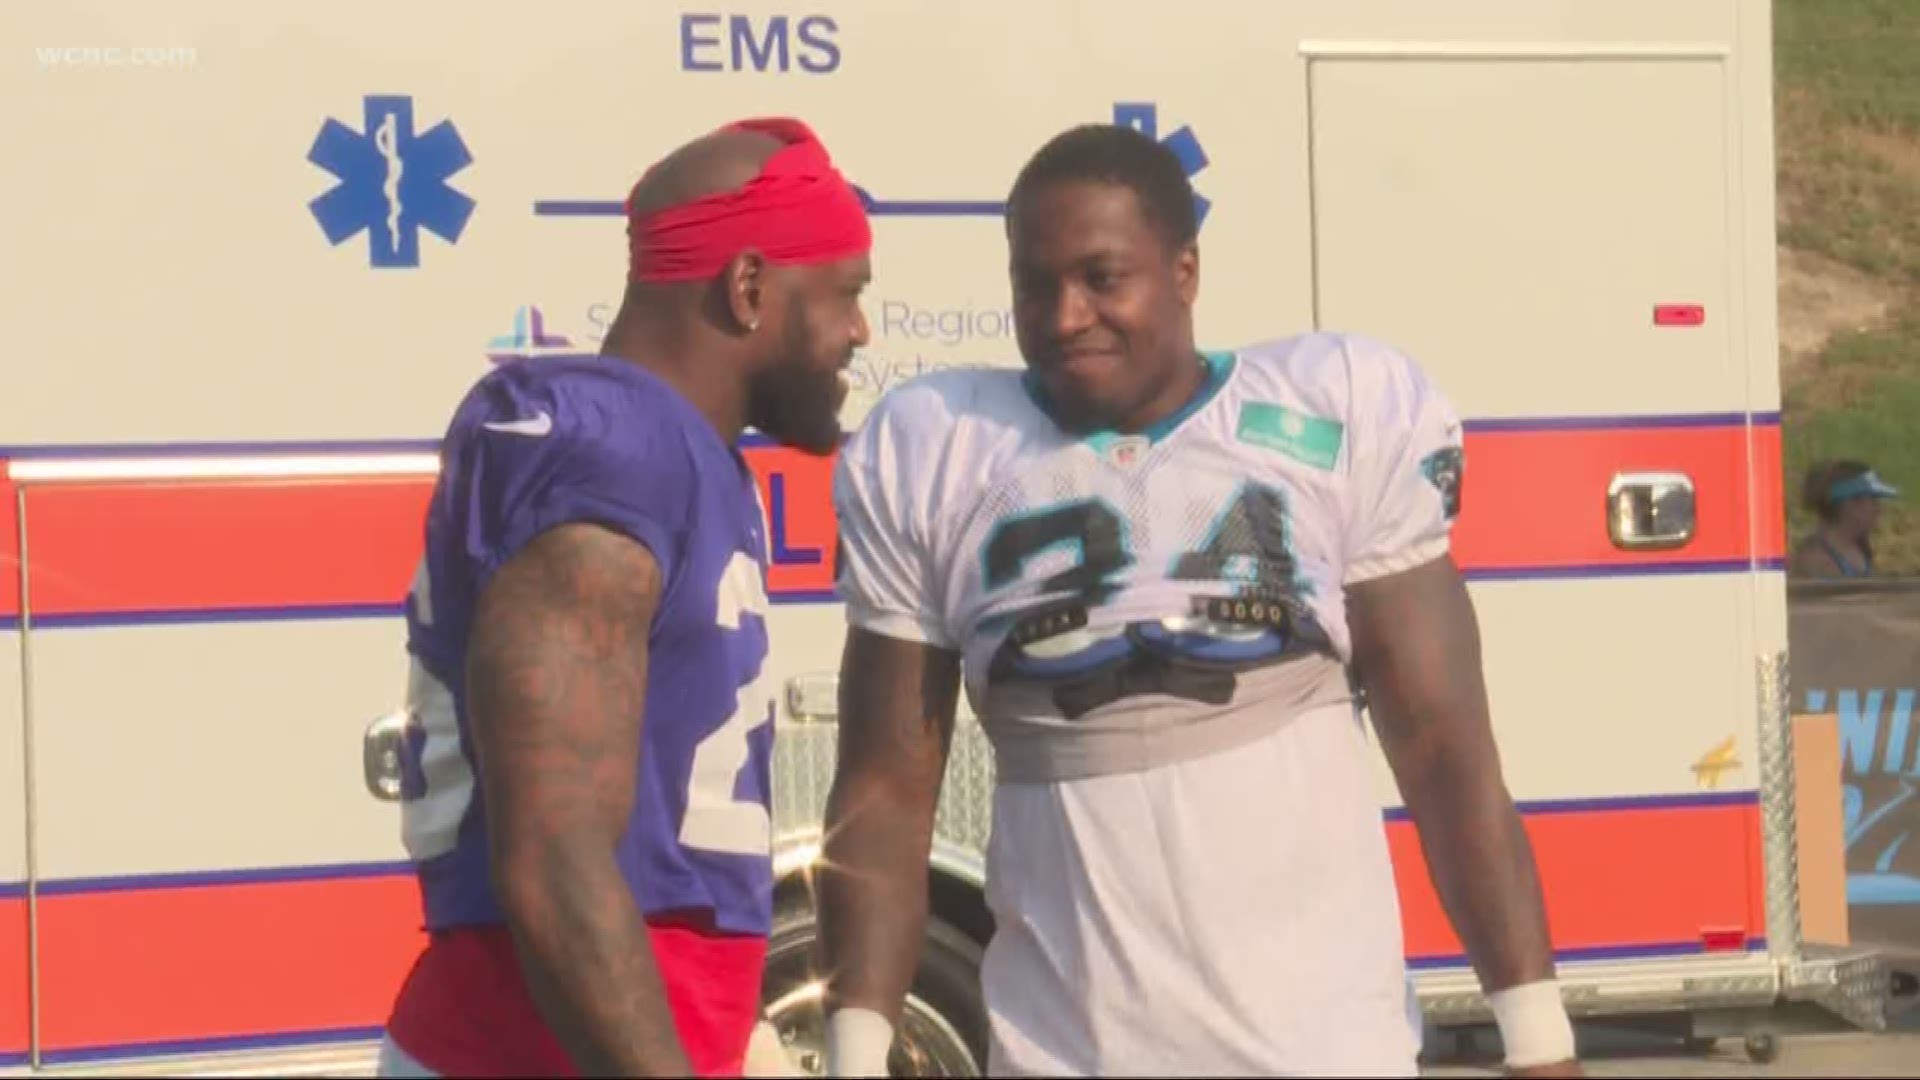 Normally when teams get together for joint practices in training camp, fists tend to fly. But for the Panthers and Bills on Tuesday, it was a friendly and familiar affair.